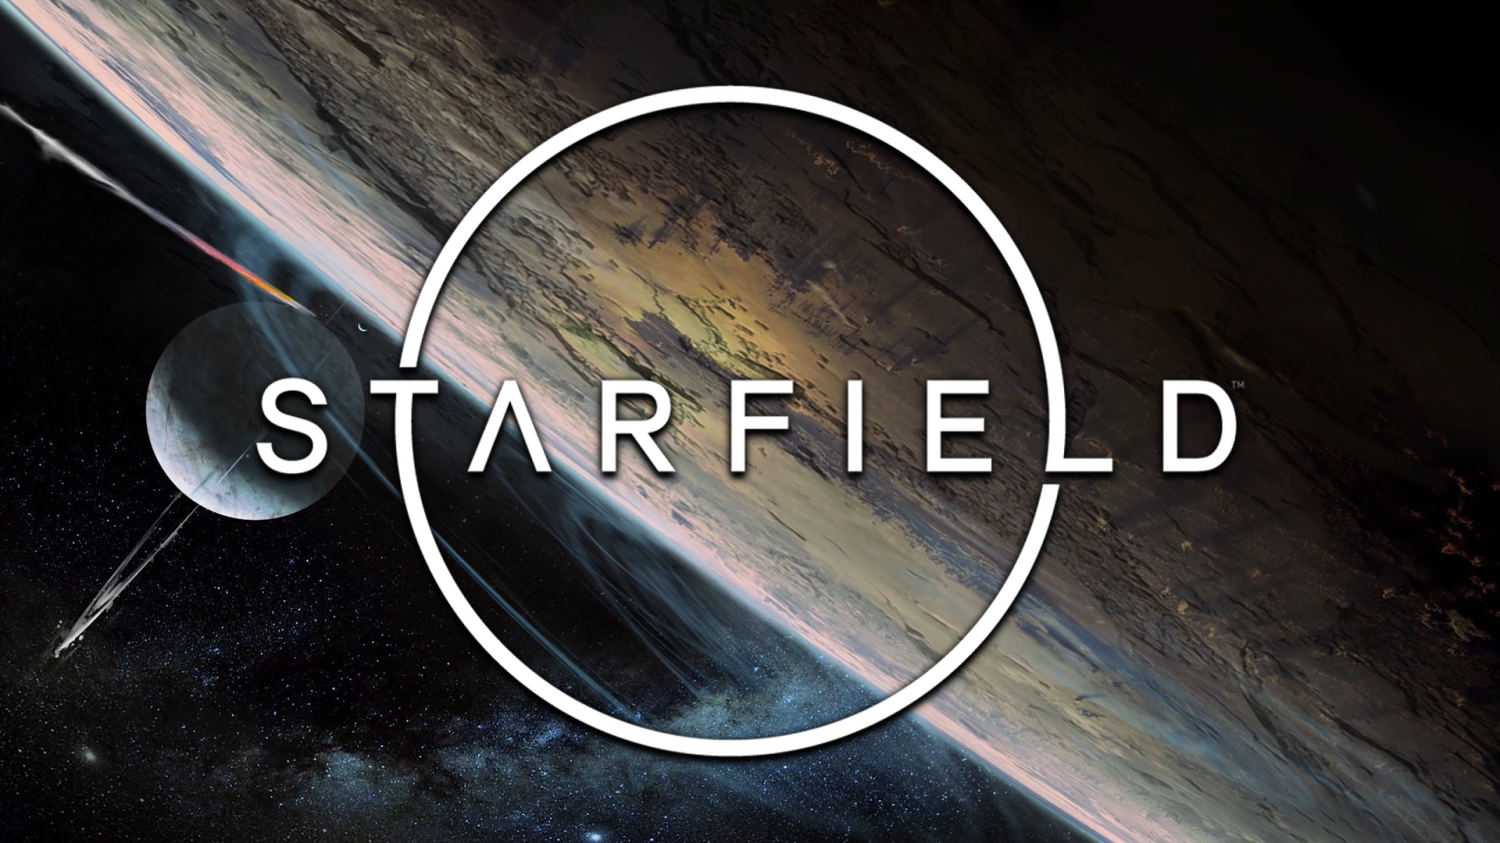 Starfield console commands and cheats list: No clip, godmode and more